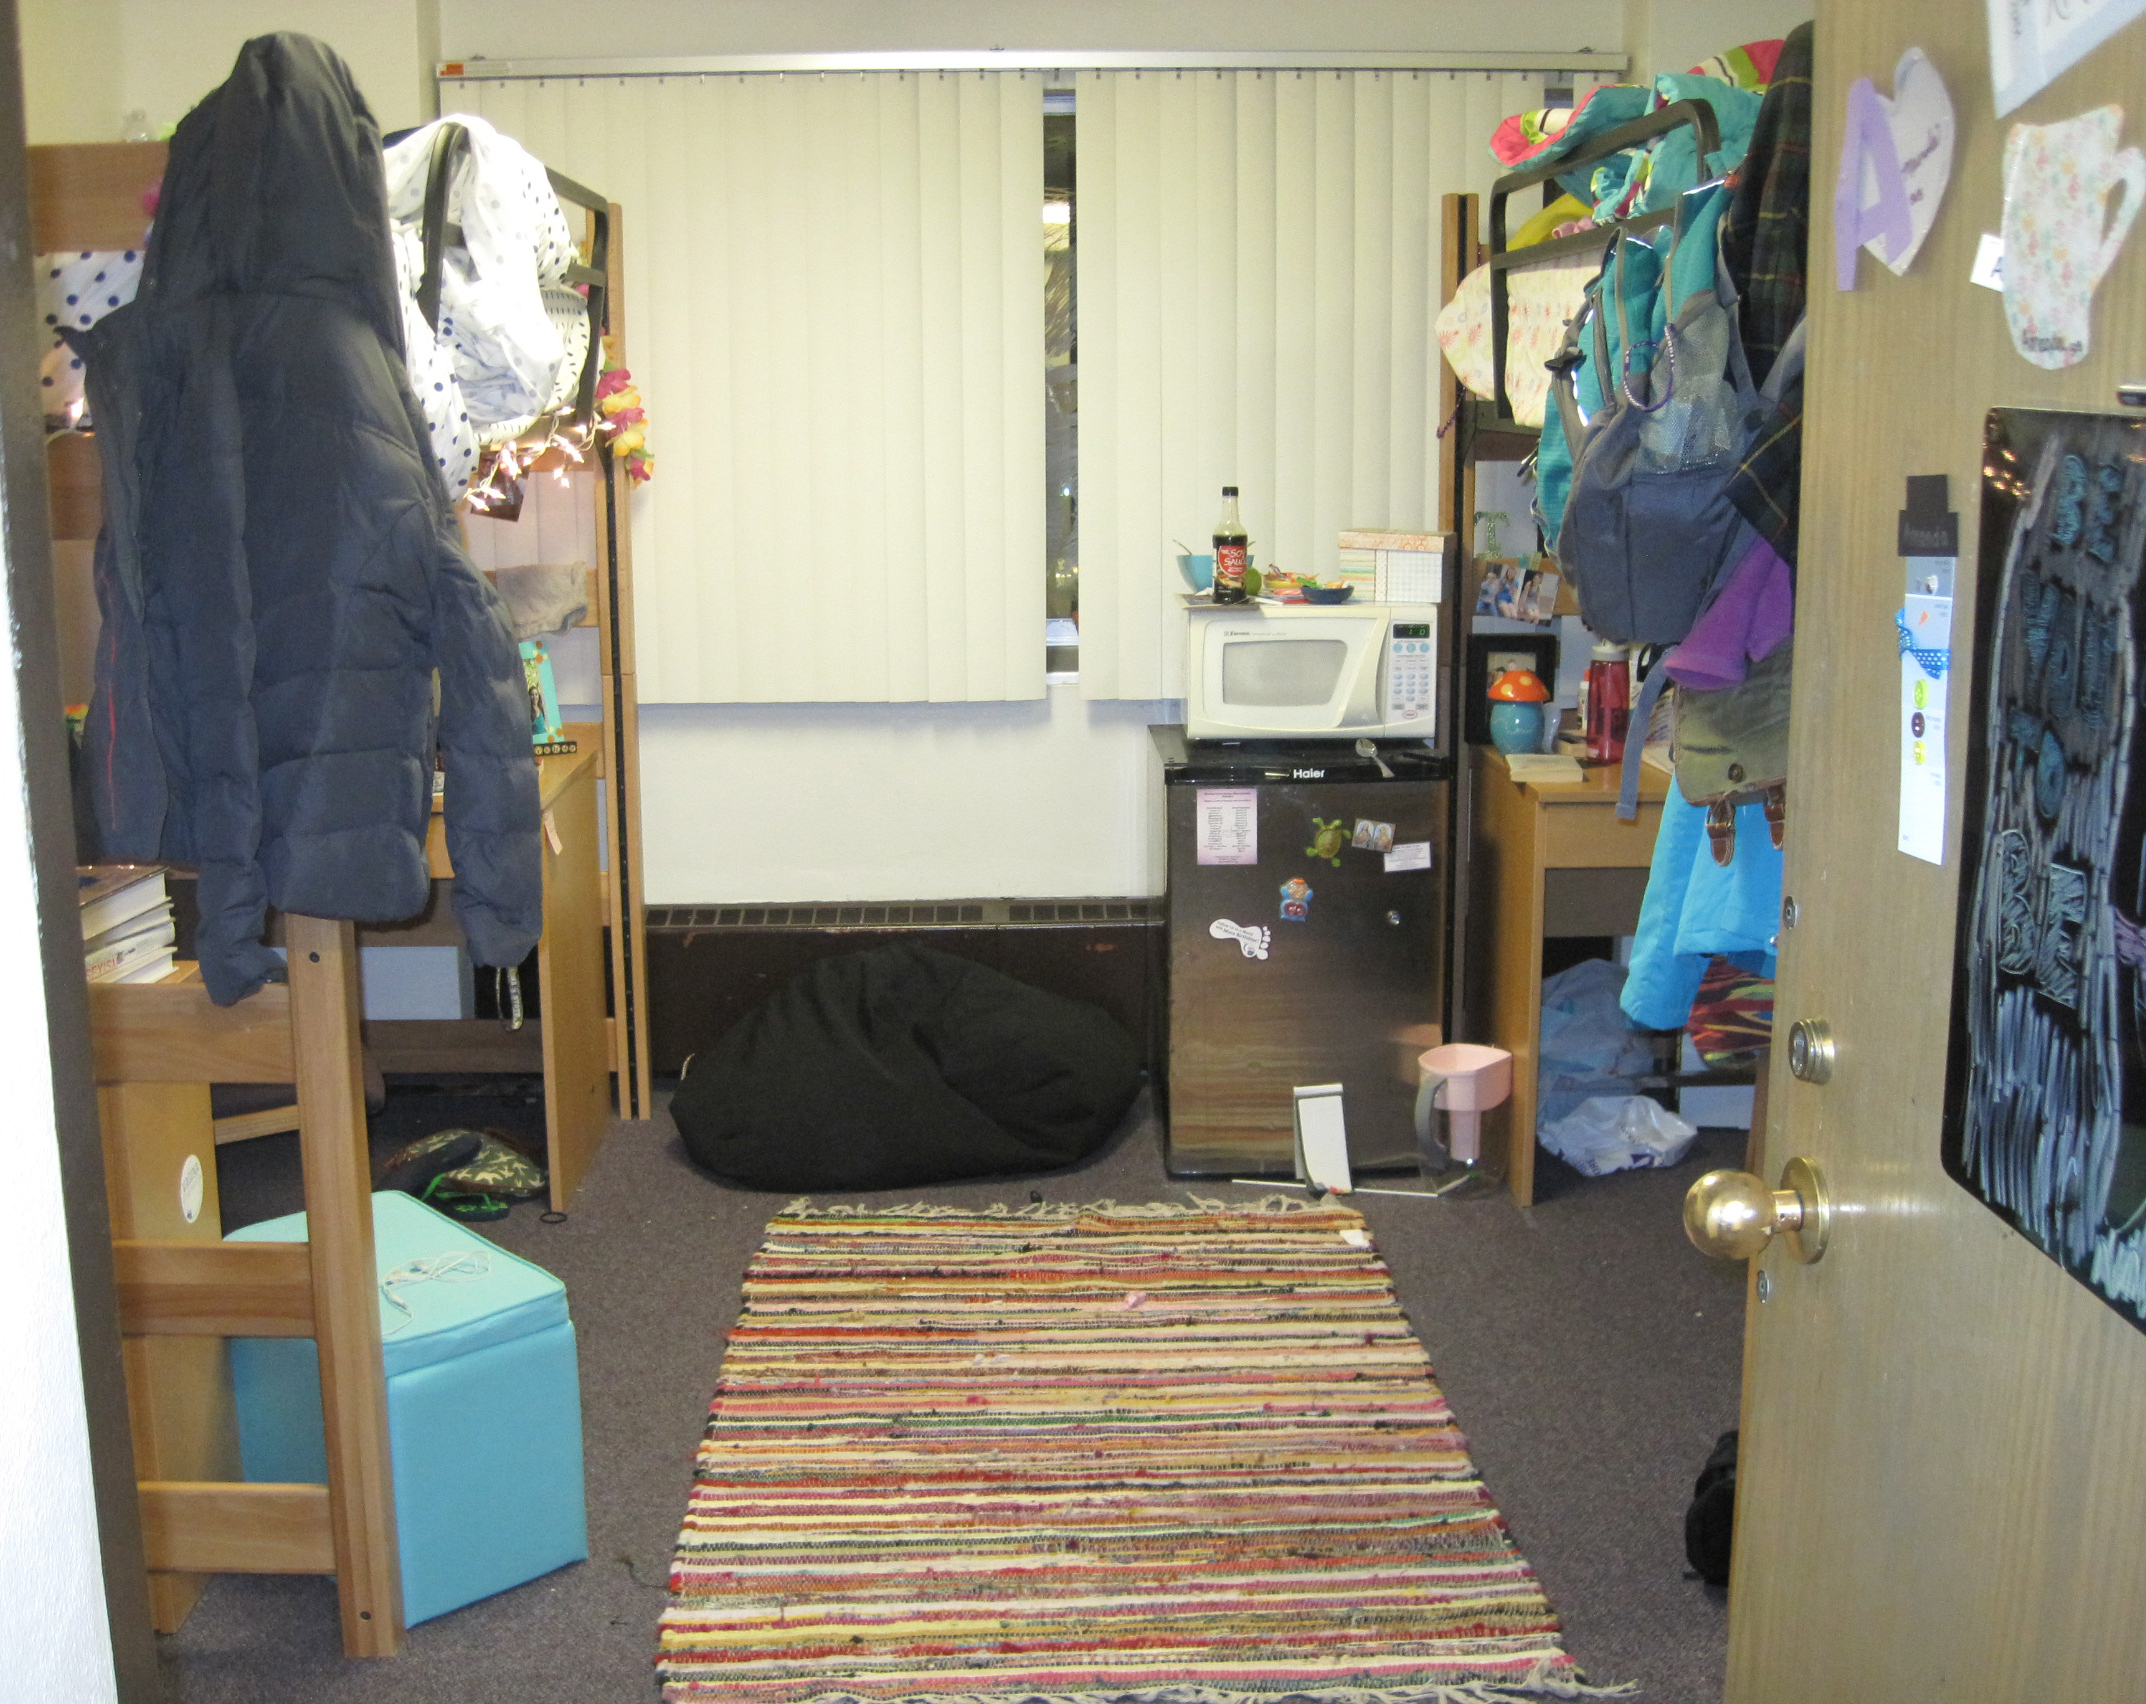 A dorm room with two lofted beds